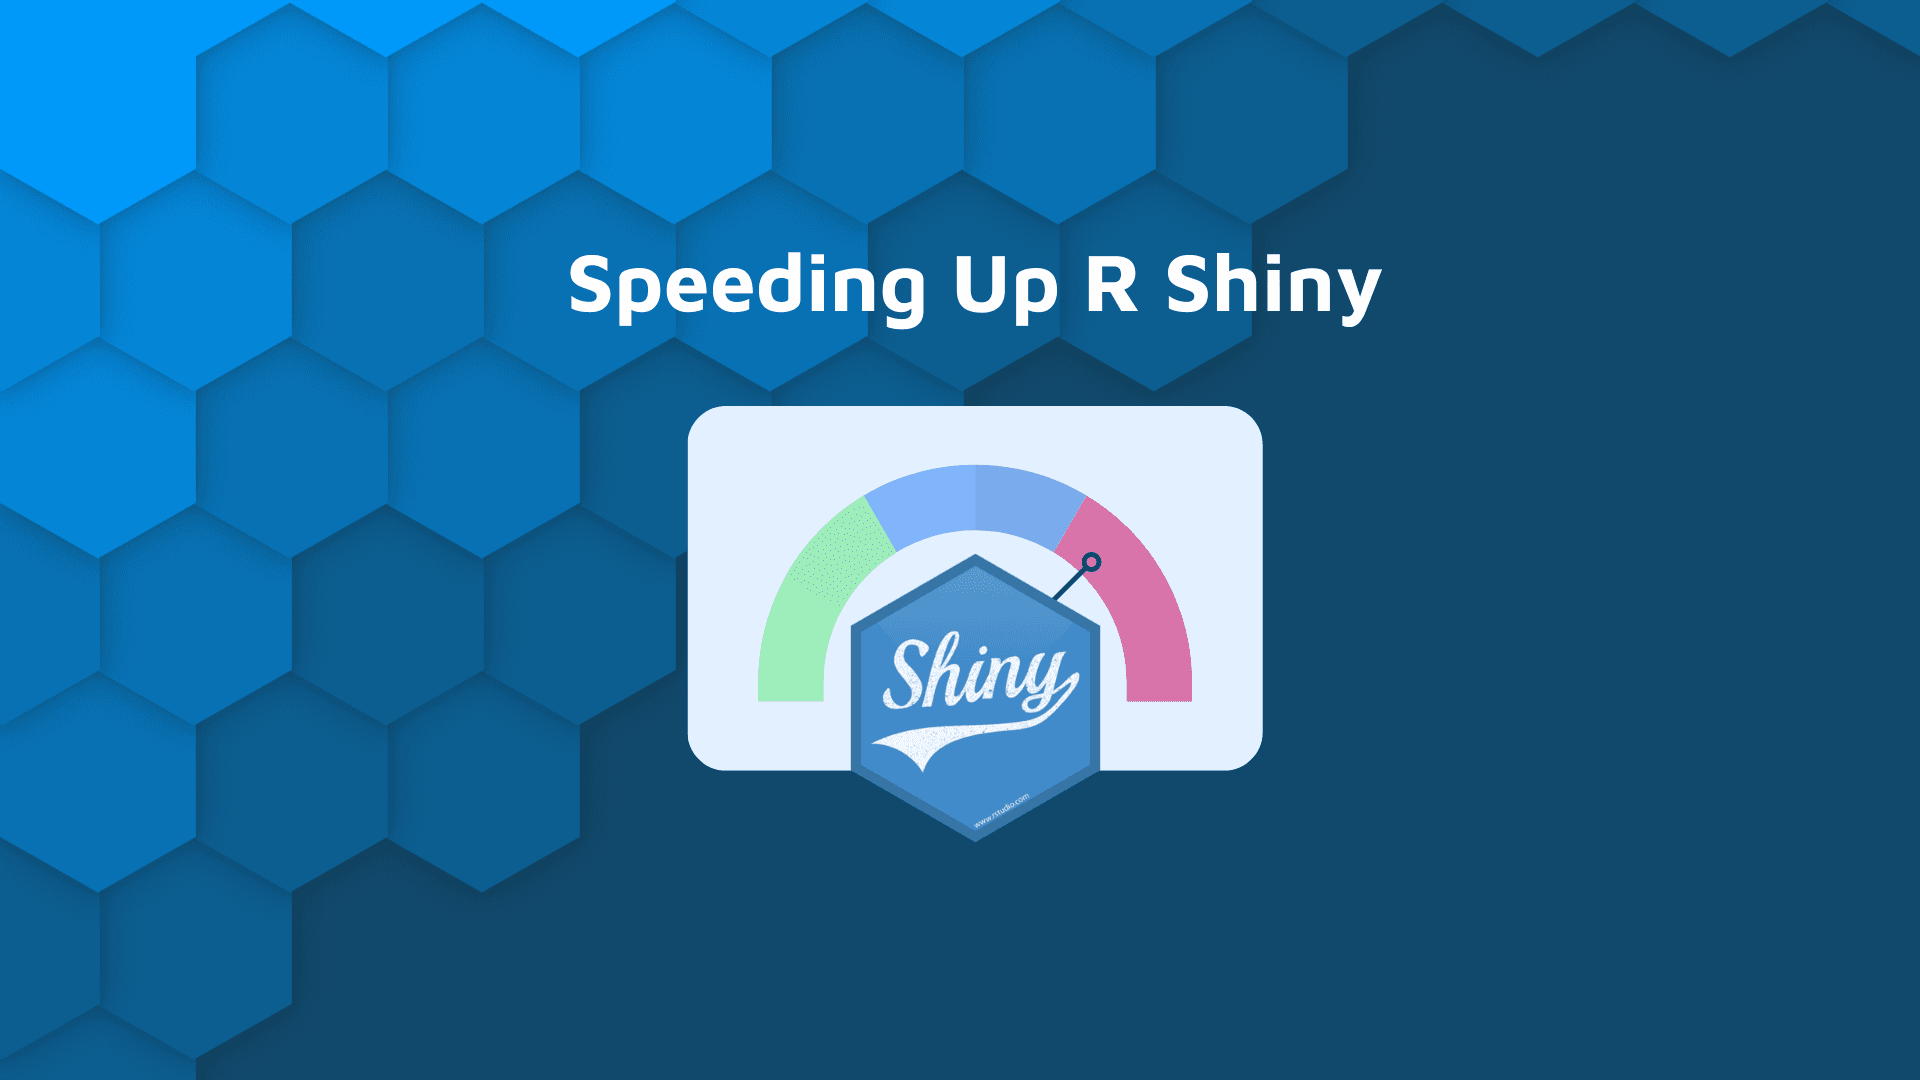 Blog hero hex banner with white text, "speeding up r shiny" and Shiny open source logo over speedometer